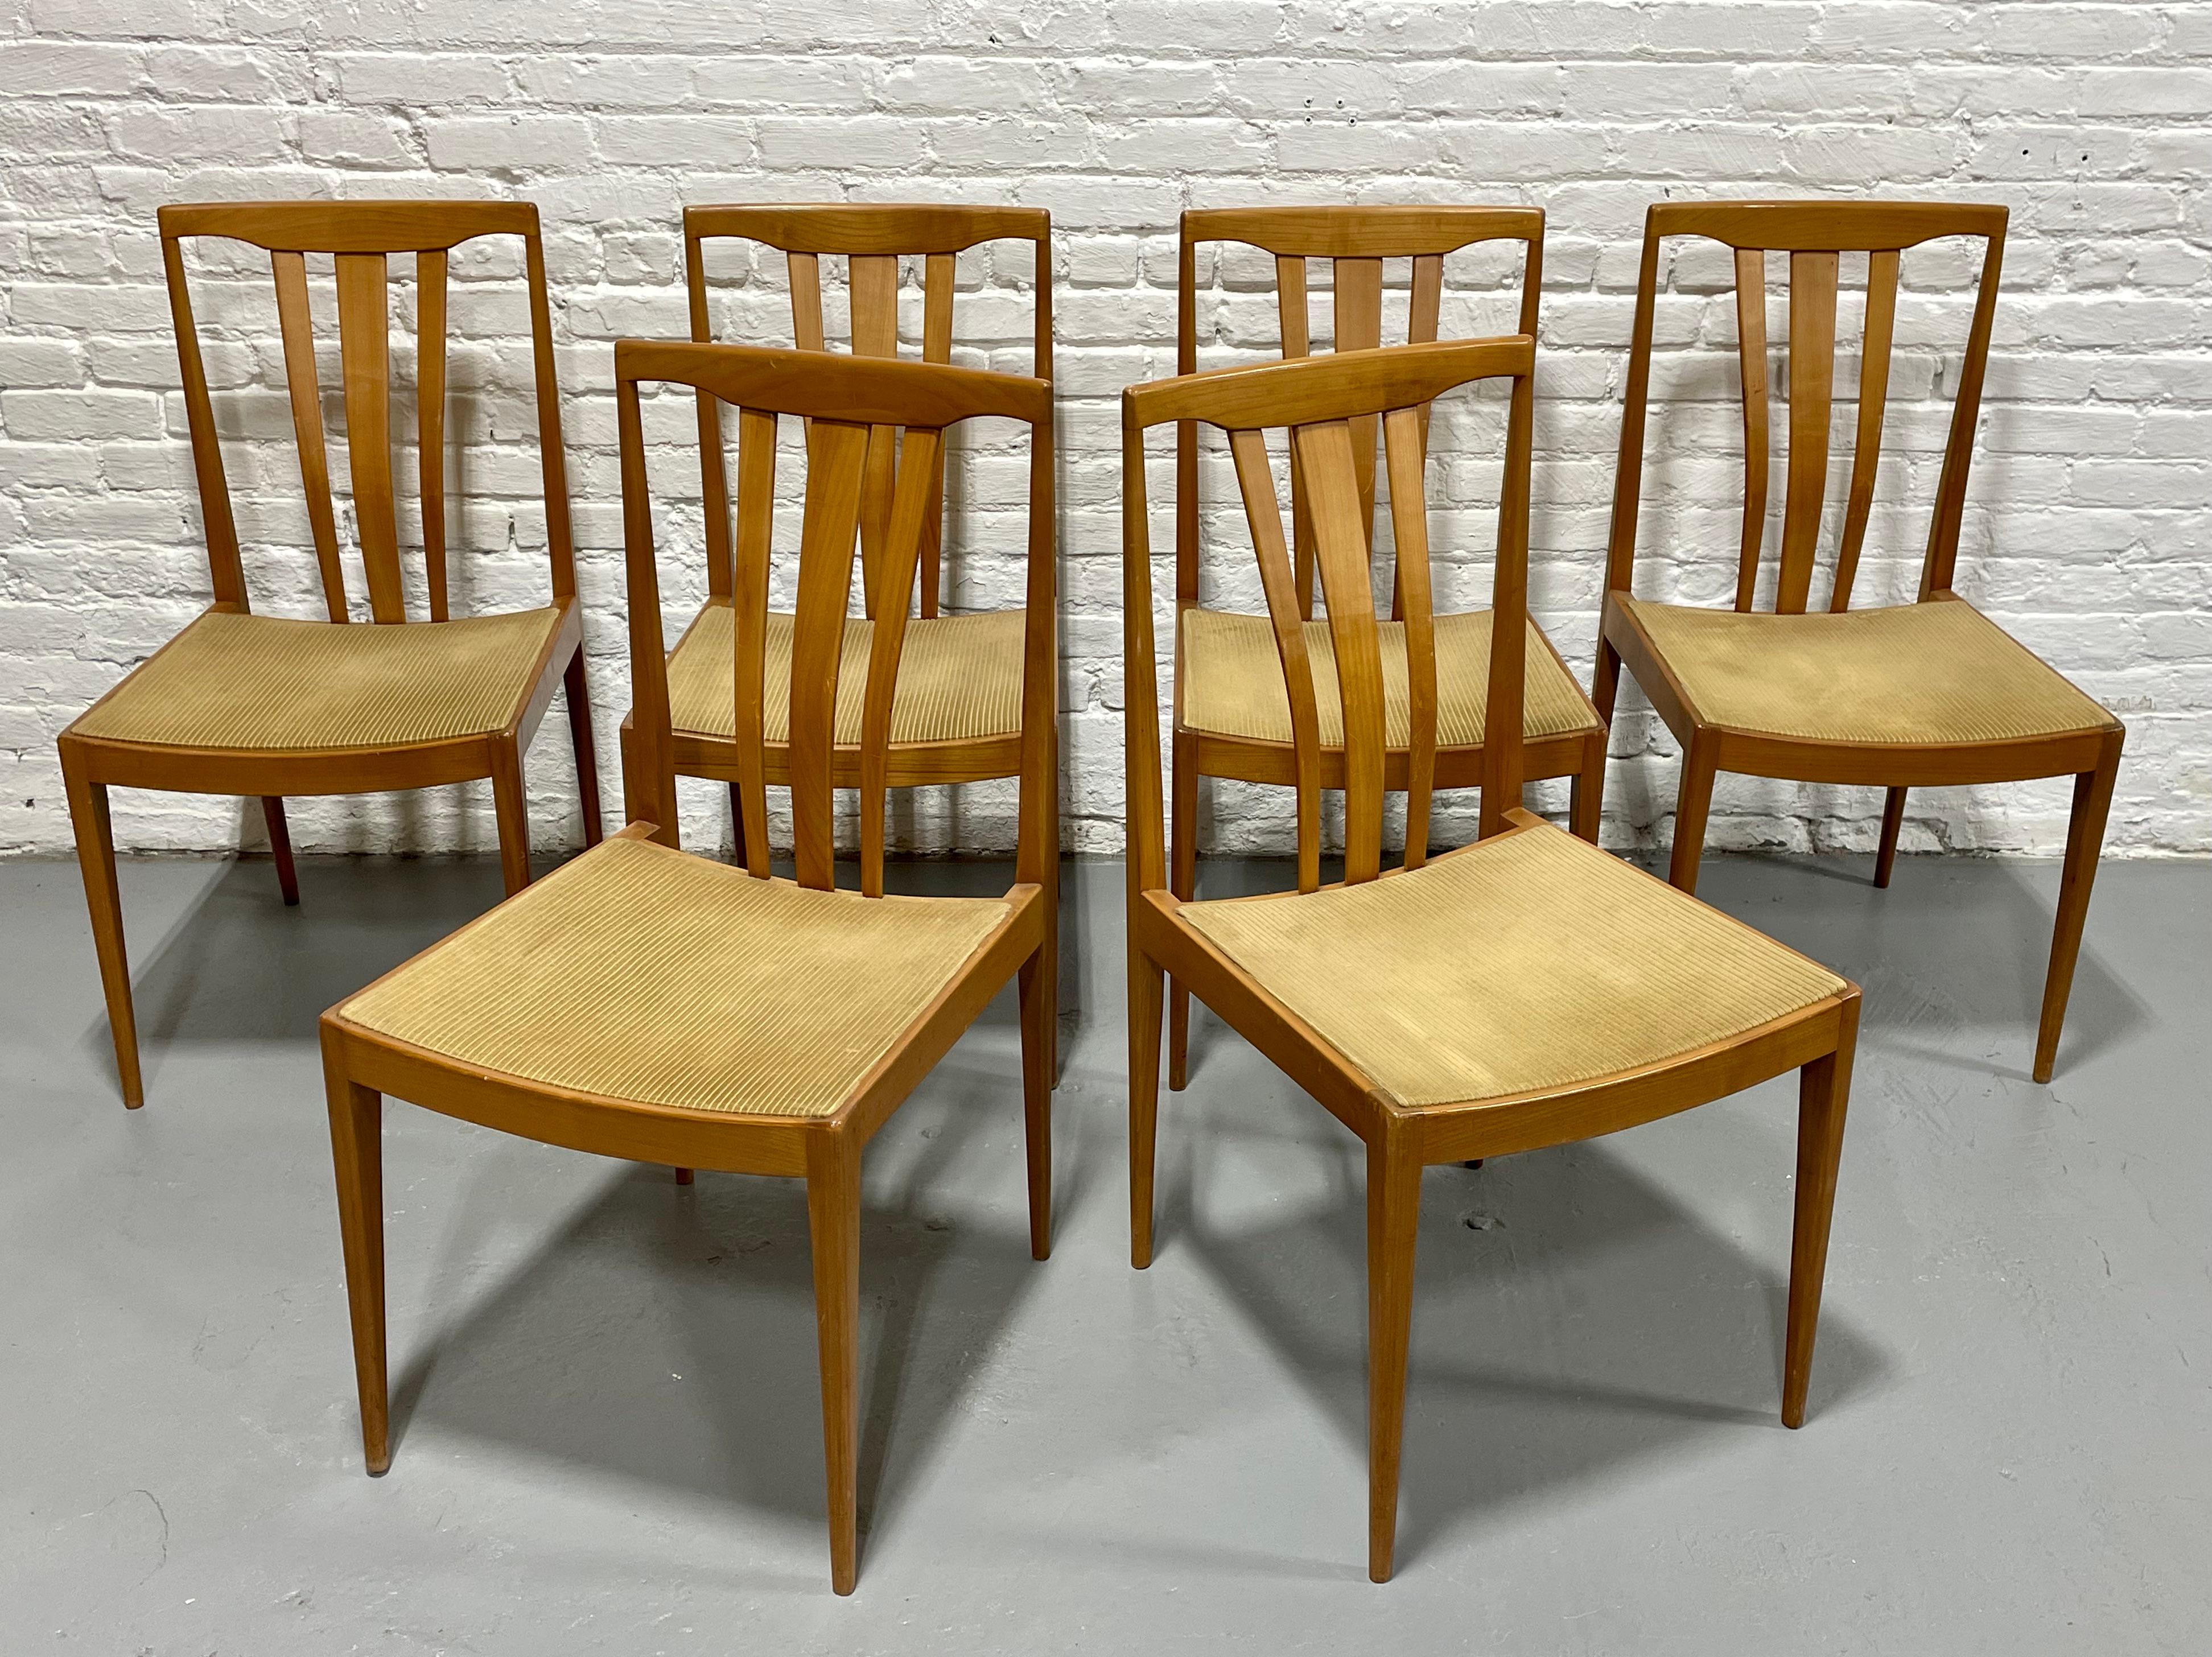 Mid Century Modern Maple Sculpted back Dining Chairs, set of 6. These solid maple dining chairs have gorgeous sculpted back supports and neutral light mustard velour upholstered seats. The legs are tapered and are both elegant and evoke a beautiful